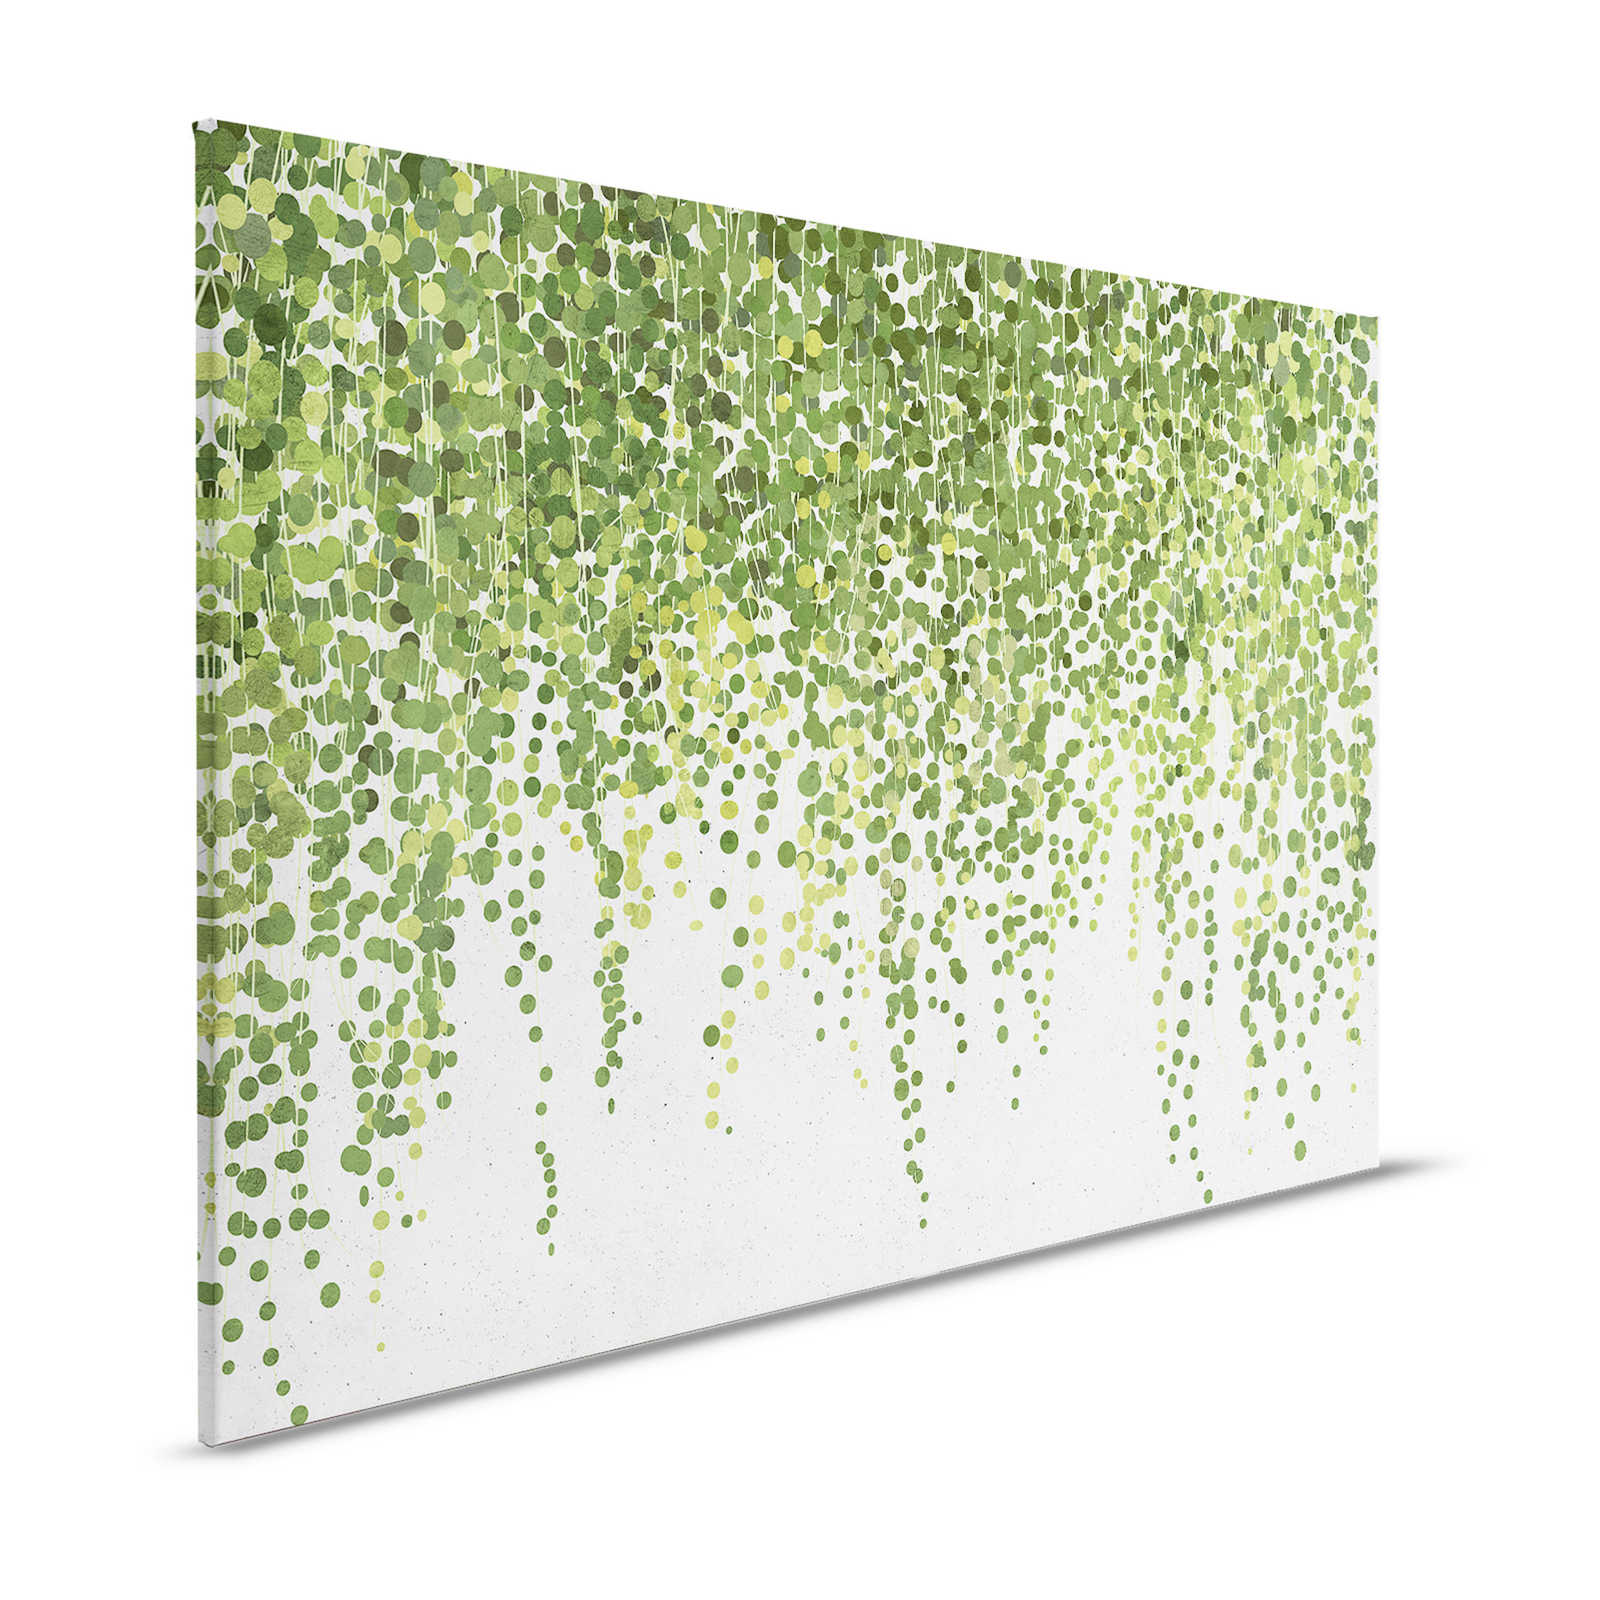 Hanging Garden 1 - Canvas painting Leaves vines, hanging garden in concrete look - 1.20 m x 0.80 m
